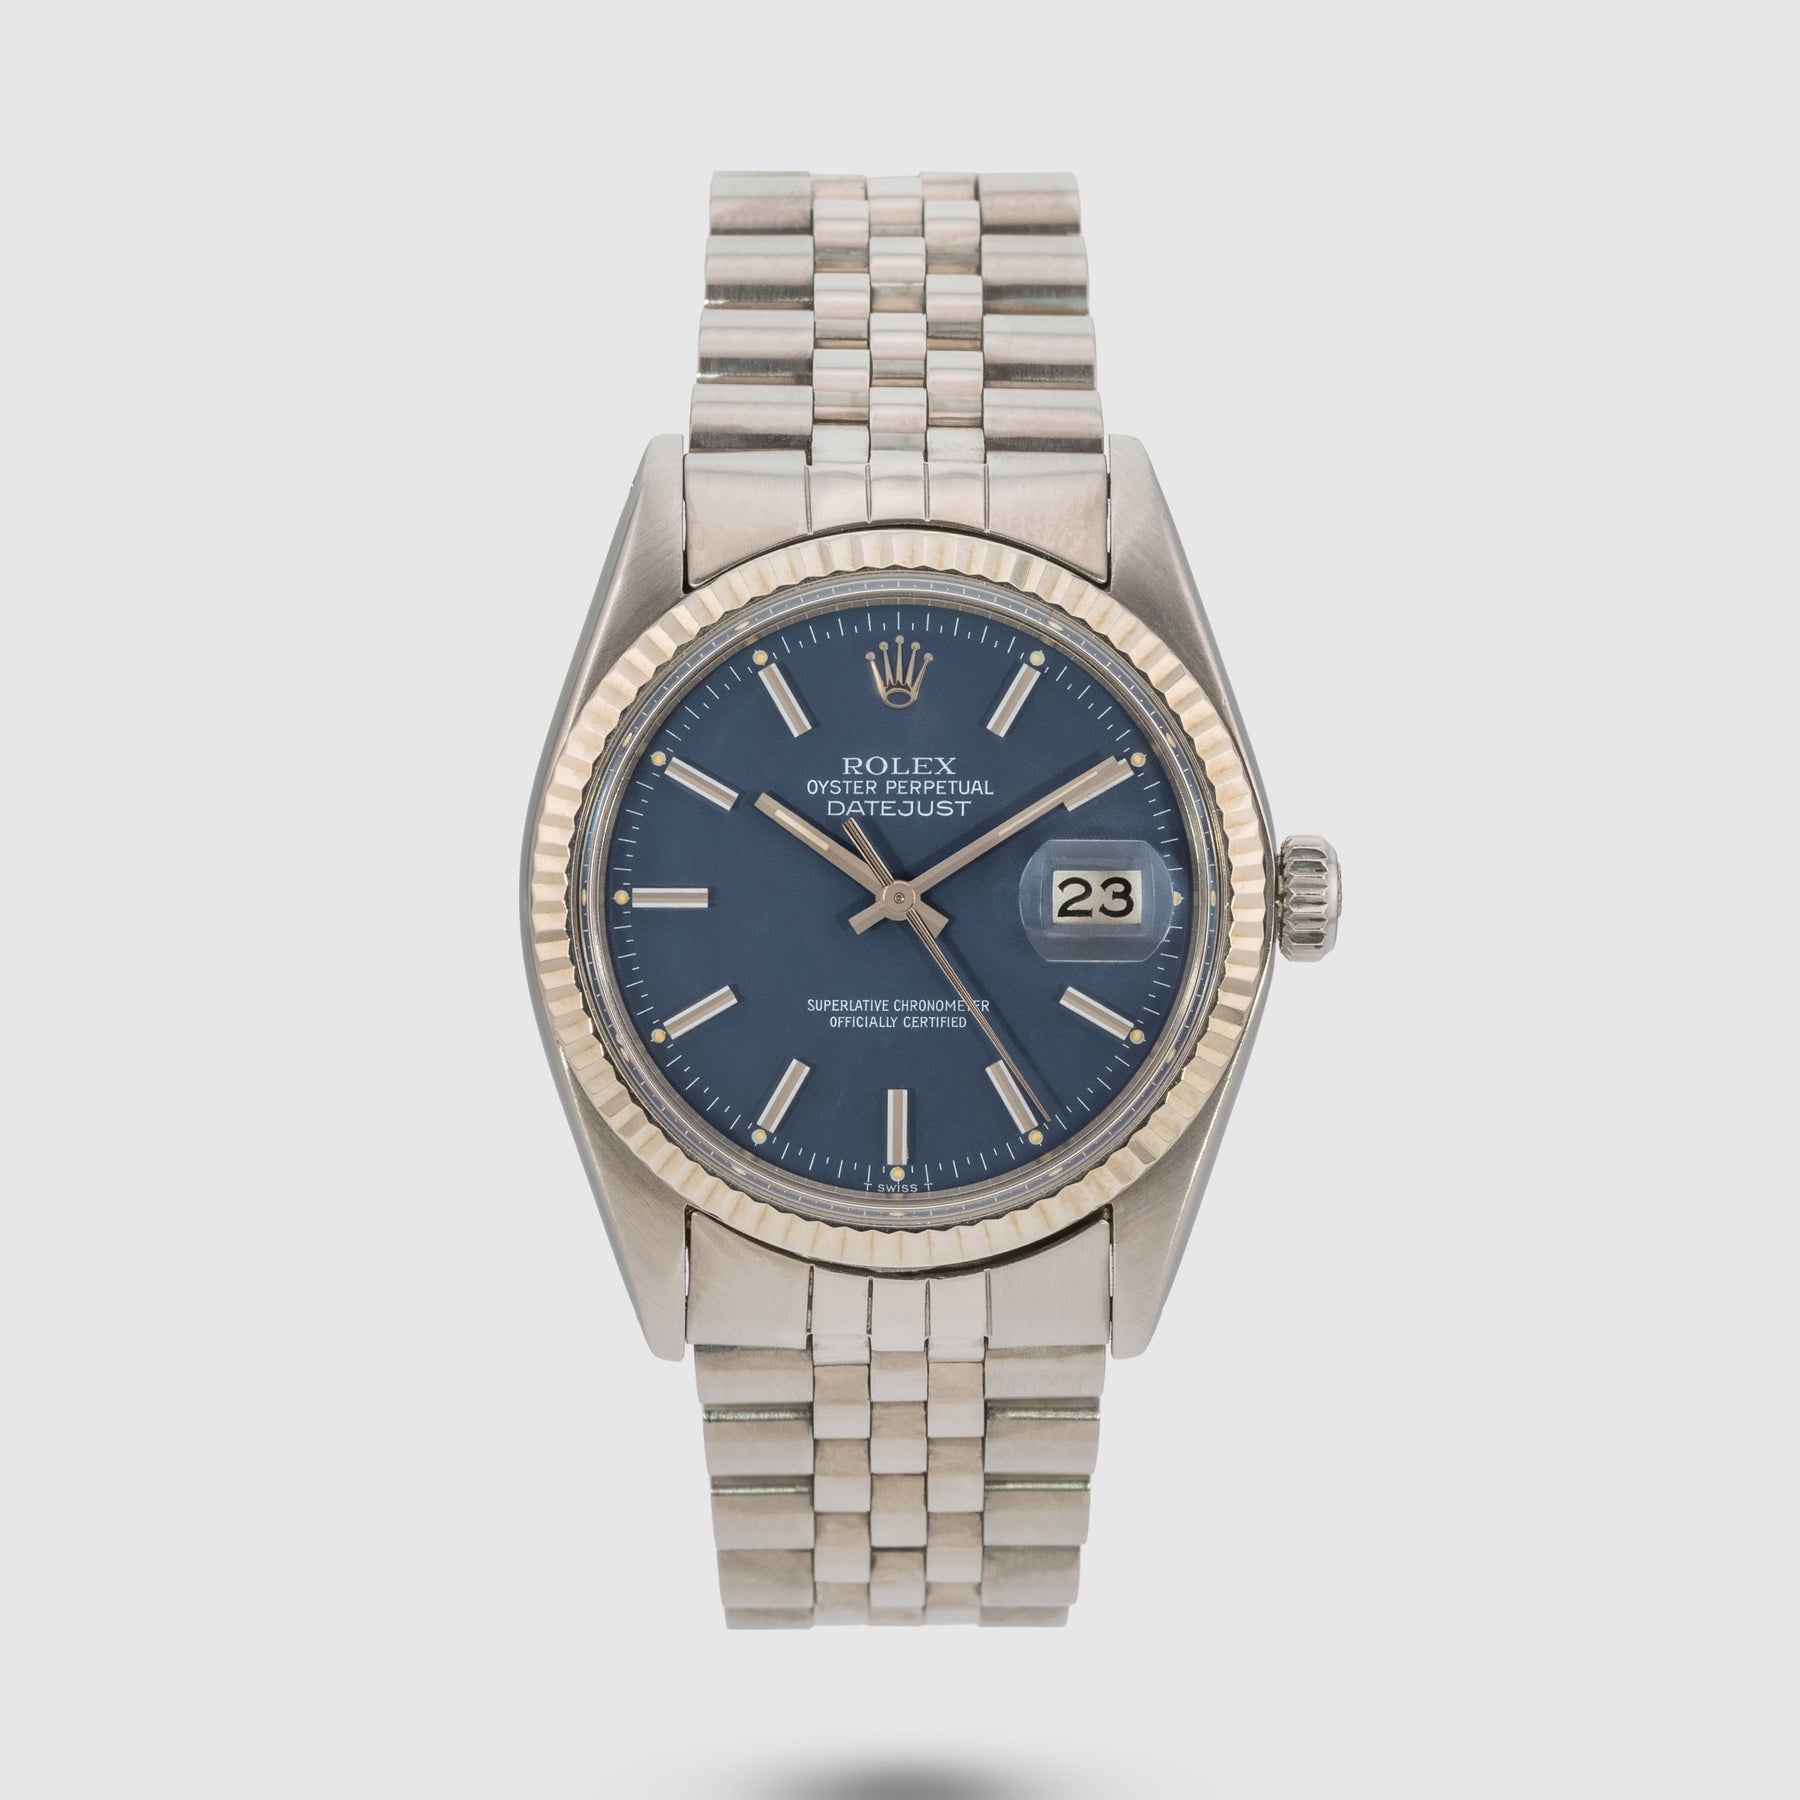 1979 Rolex Datejust Blue Dial Ref. 16014 (with Papers)